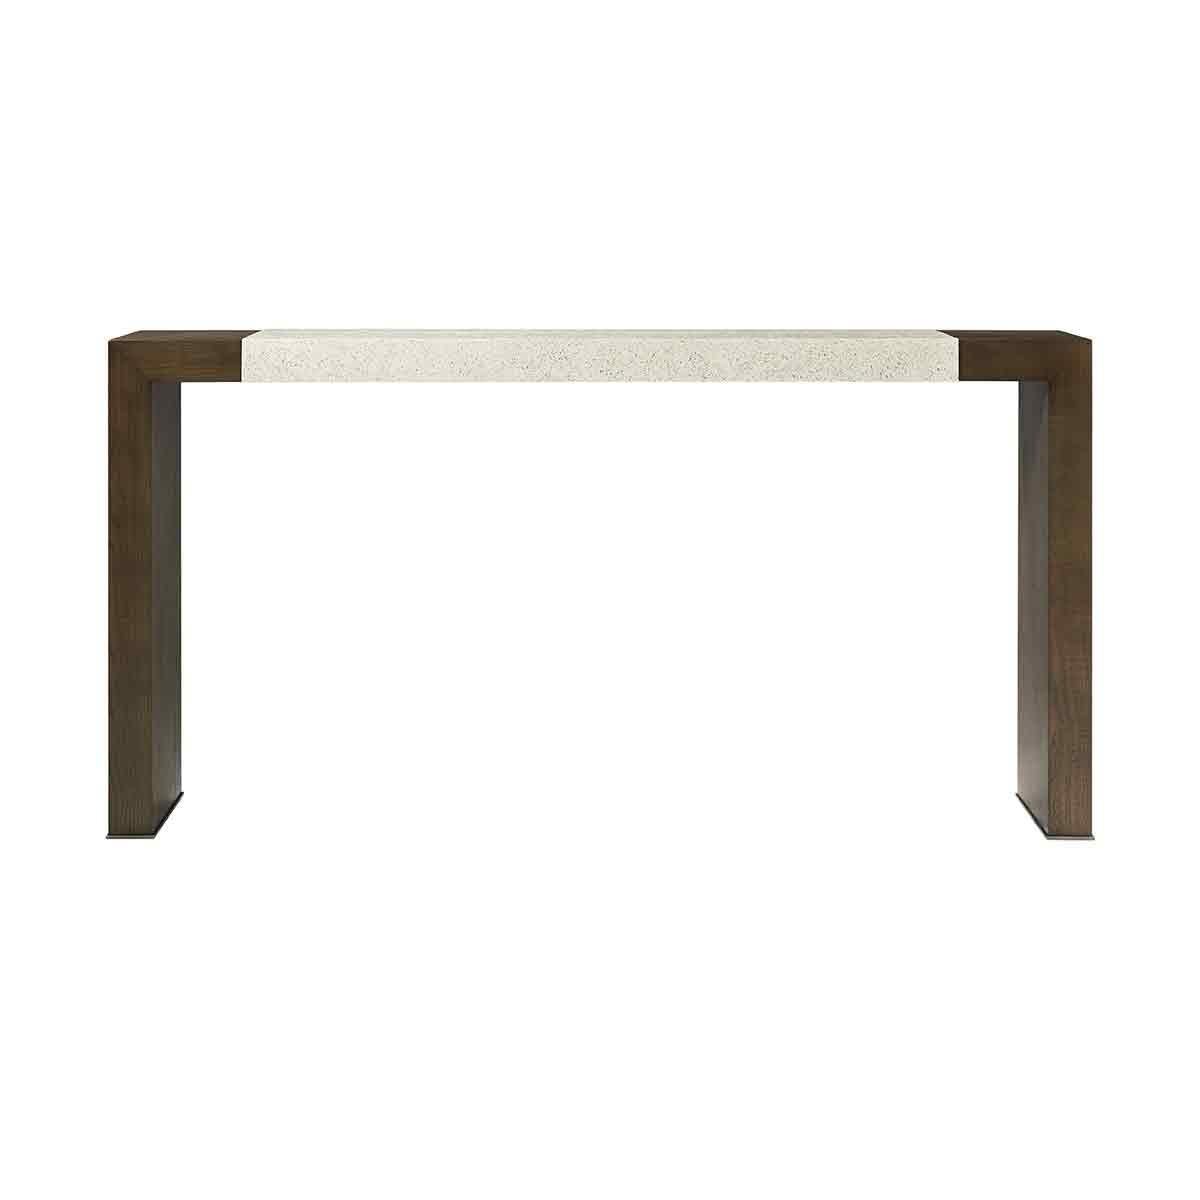 A modern parsons style console table made of figured ash in our dark earth finish with our exclusive Mineral finished top and metal detail at the base of the legs in a bronze finish.

Dimensions: 66